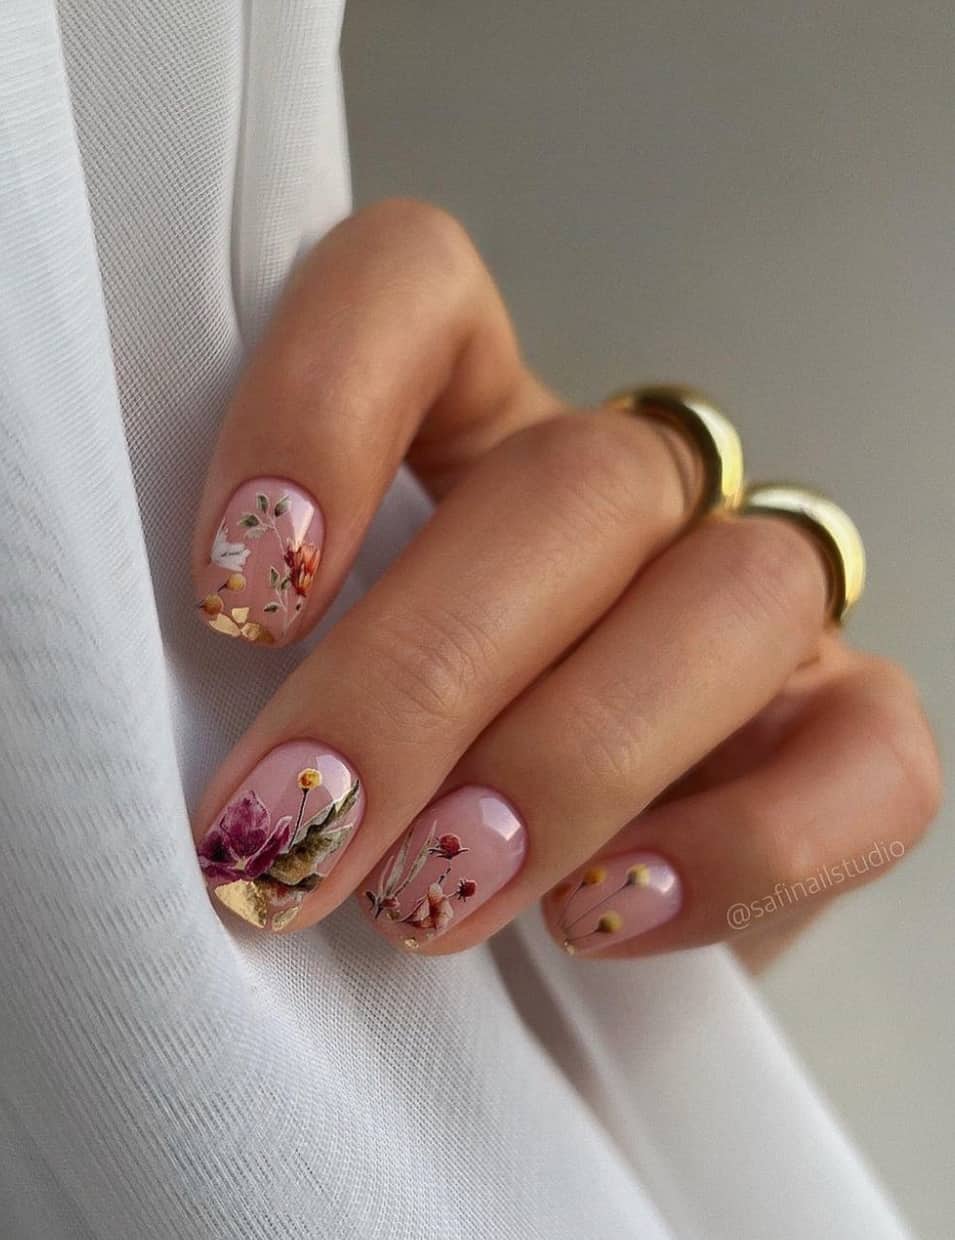 A hand with short square nails with a light pink polish and intricate floral art